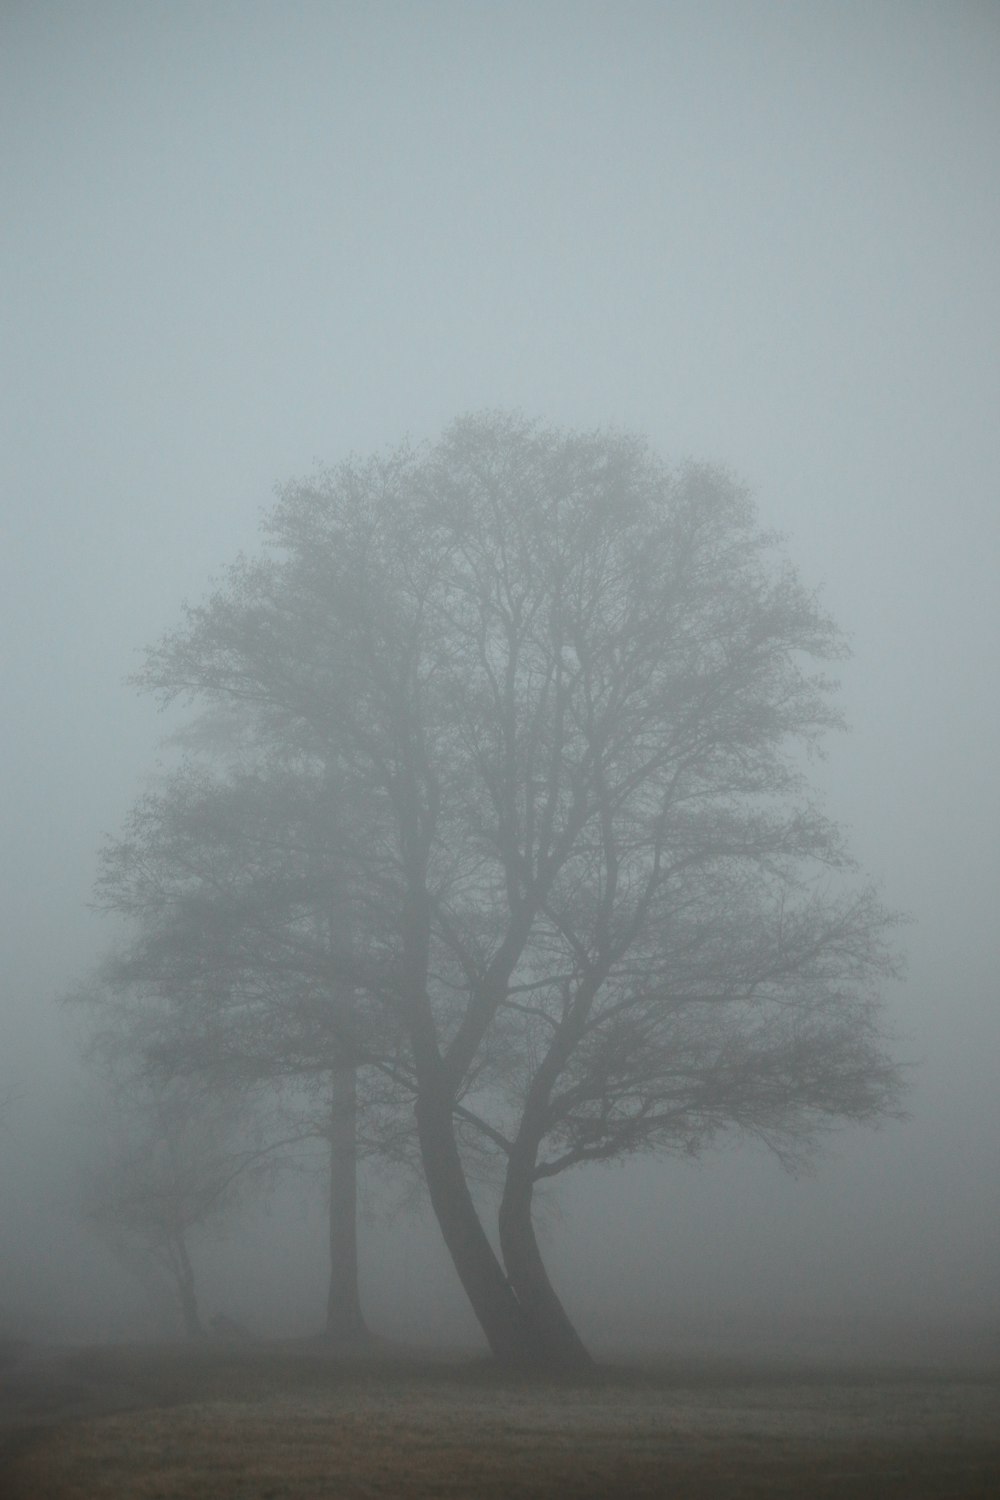 a foggy field with two trees in the foreground